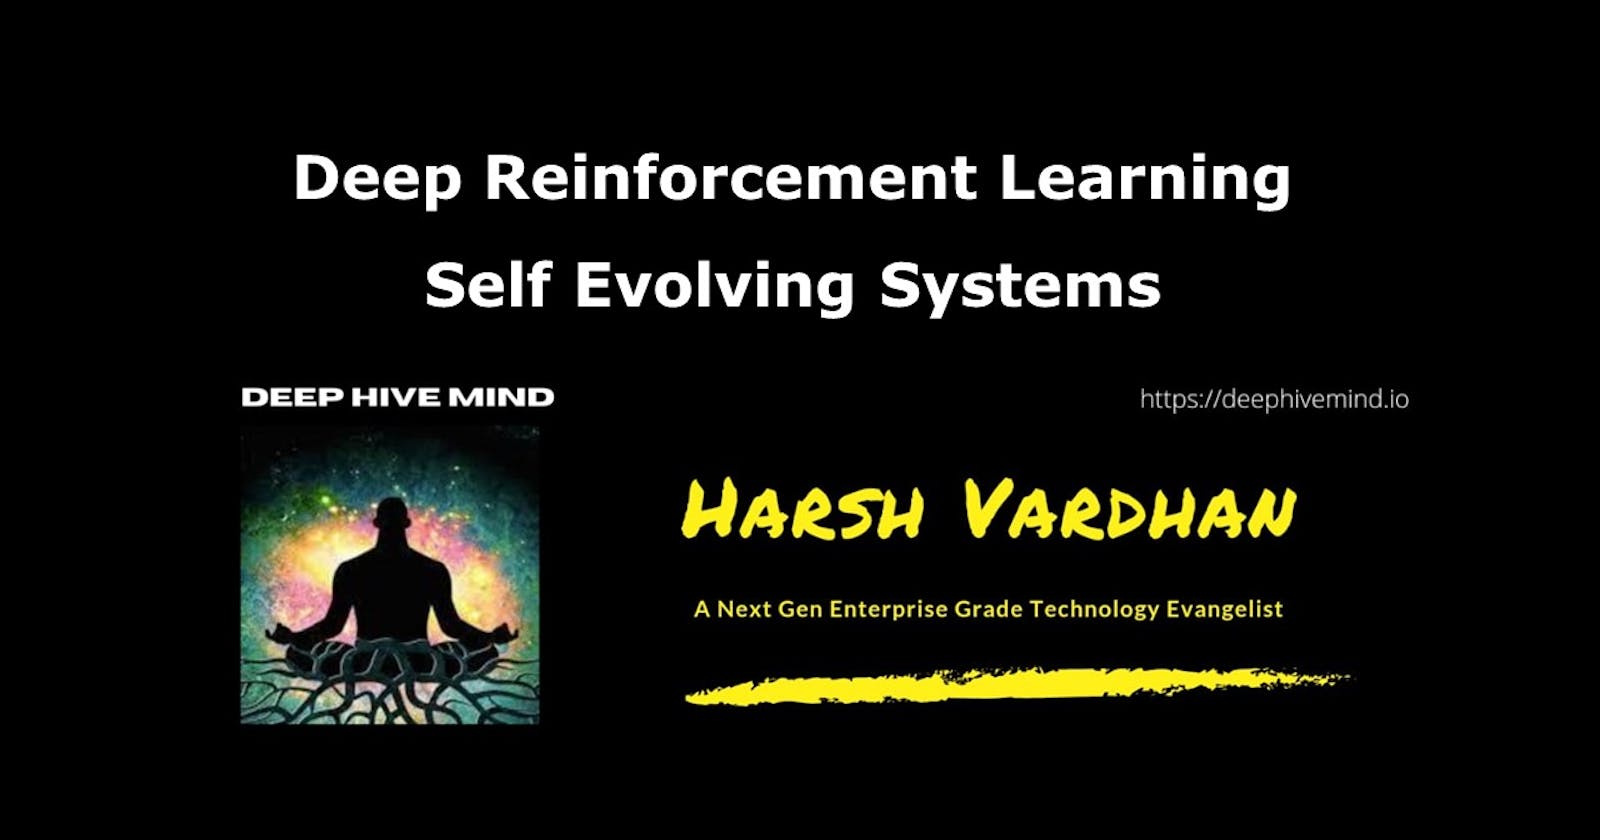 Deep Reinforcement Learning Self Evolving Systems